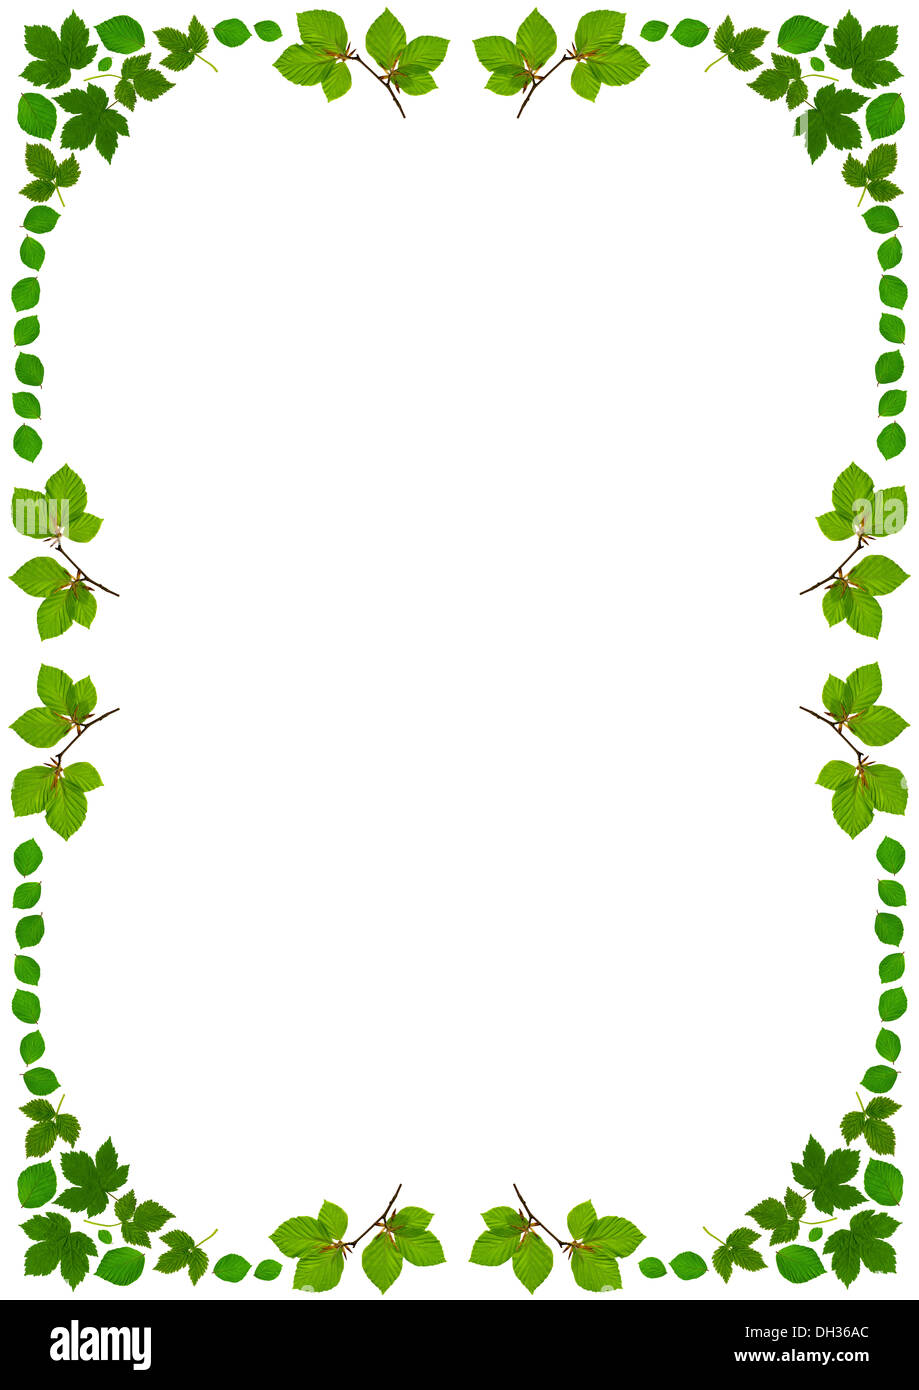 frame with green beech leaves and branches Stock Photo